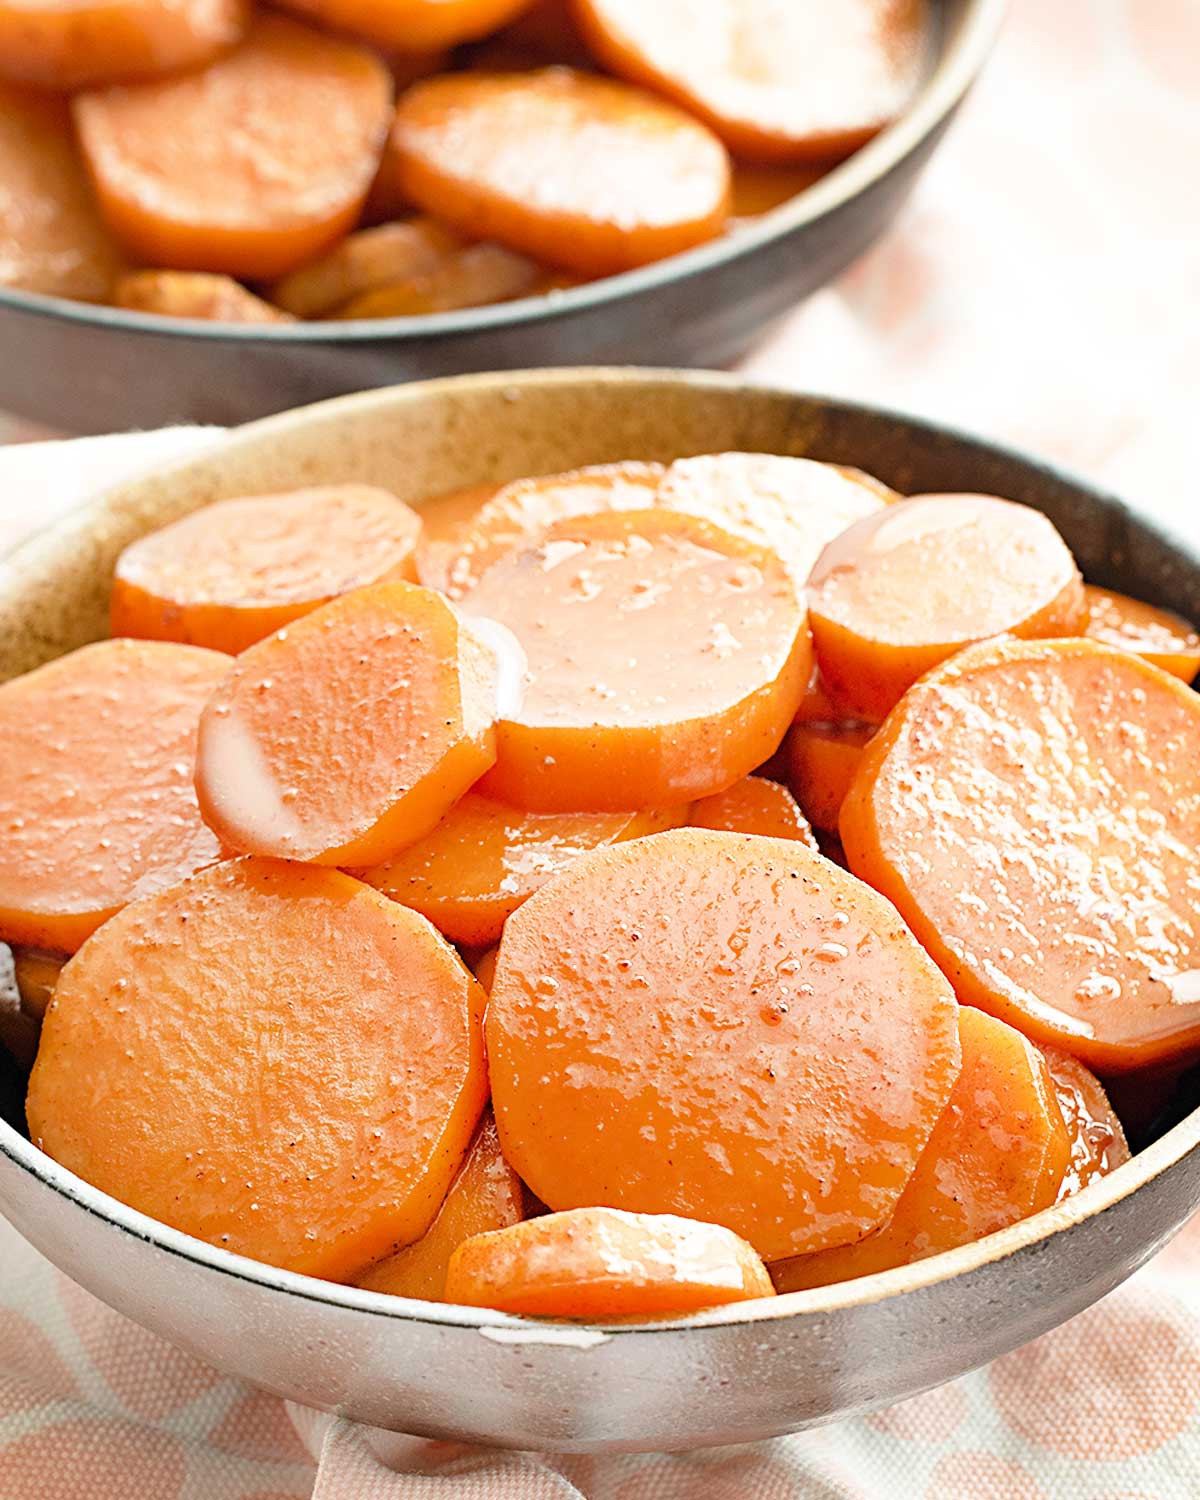 candied yams in a bowl.